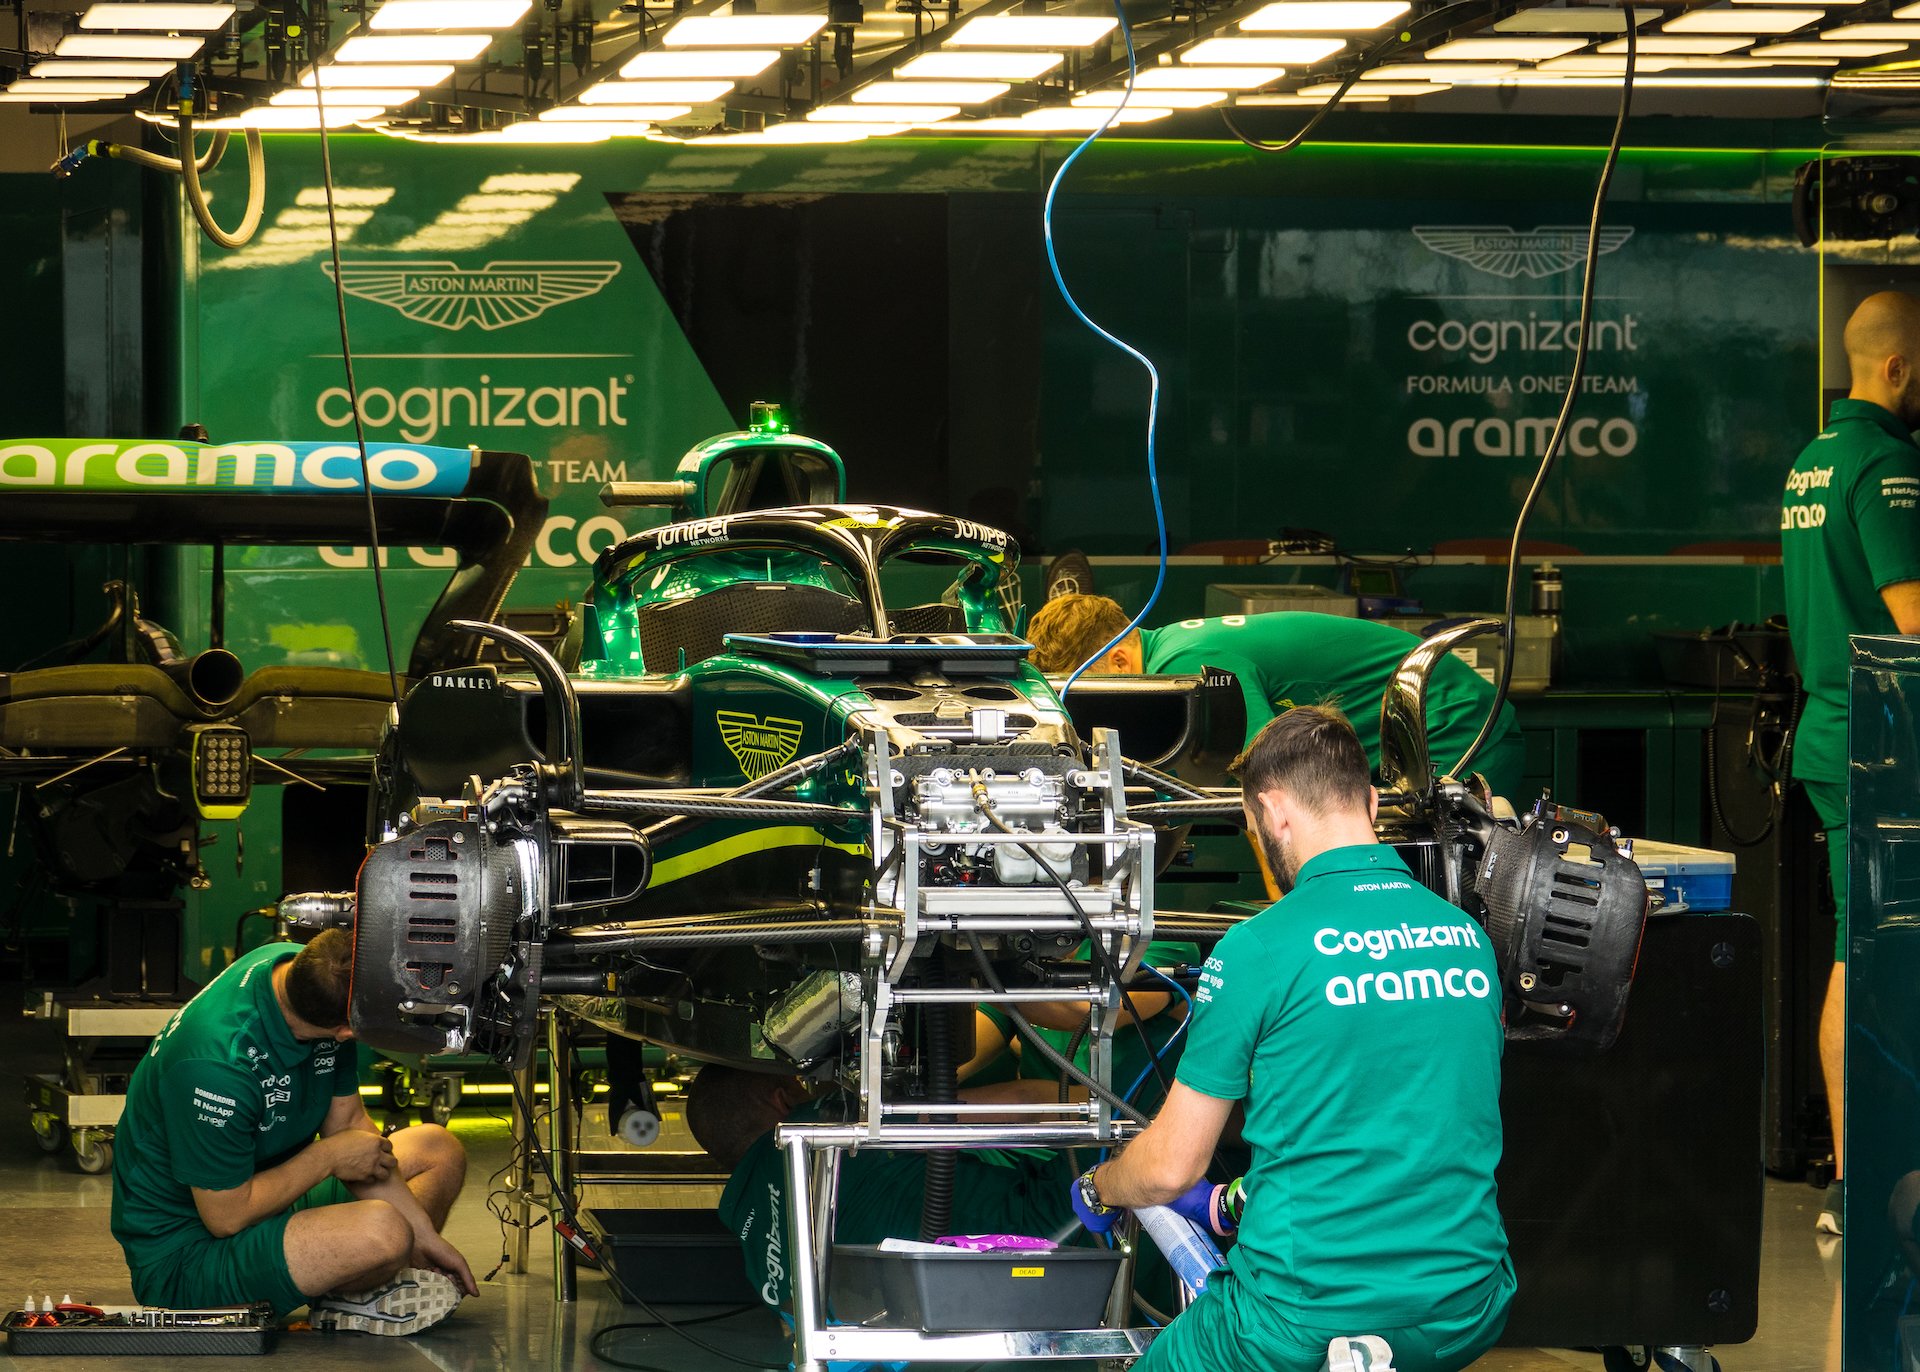  A peek inside the Aston Martin garage, as they were working on the car. 